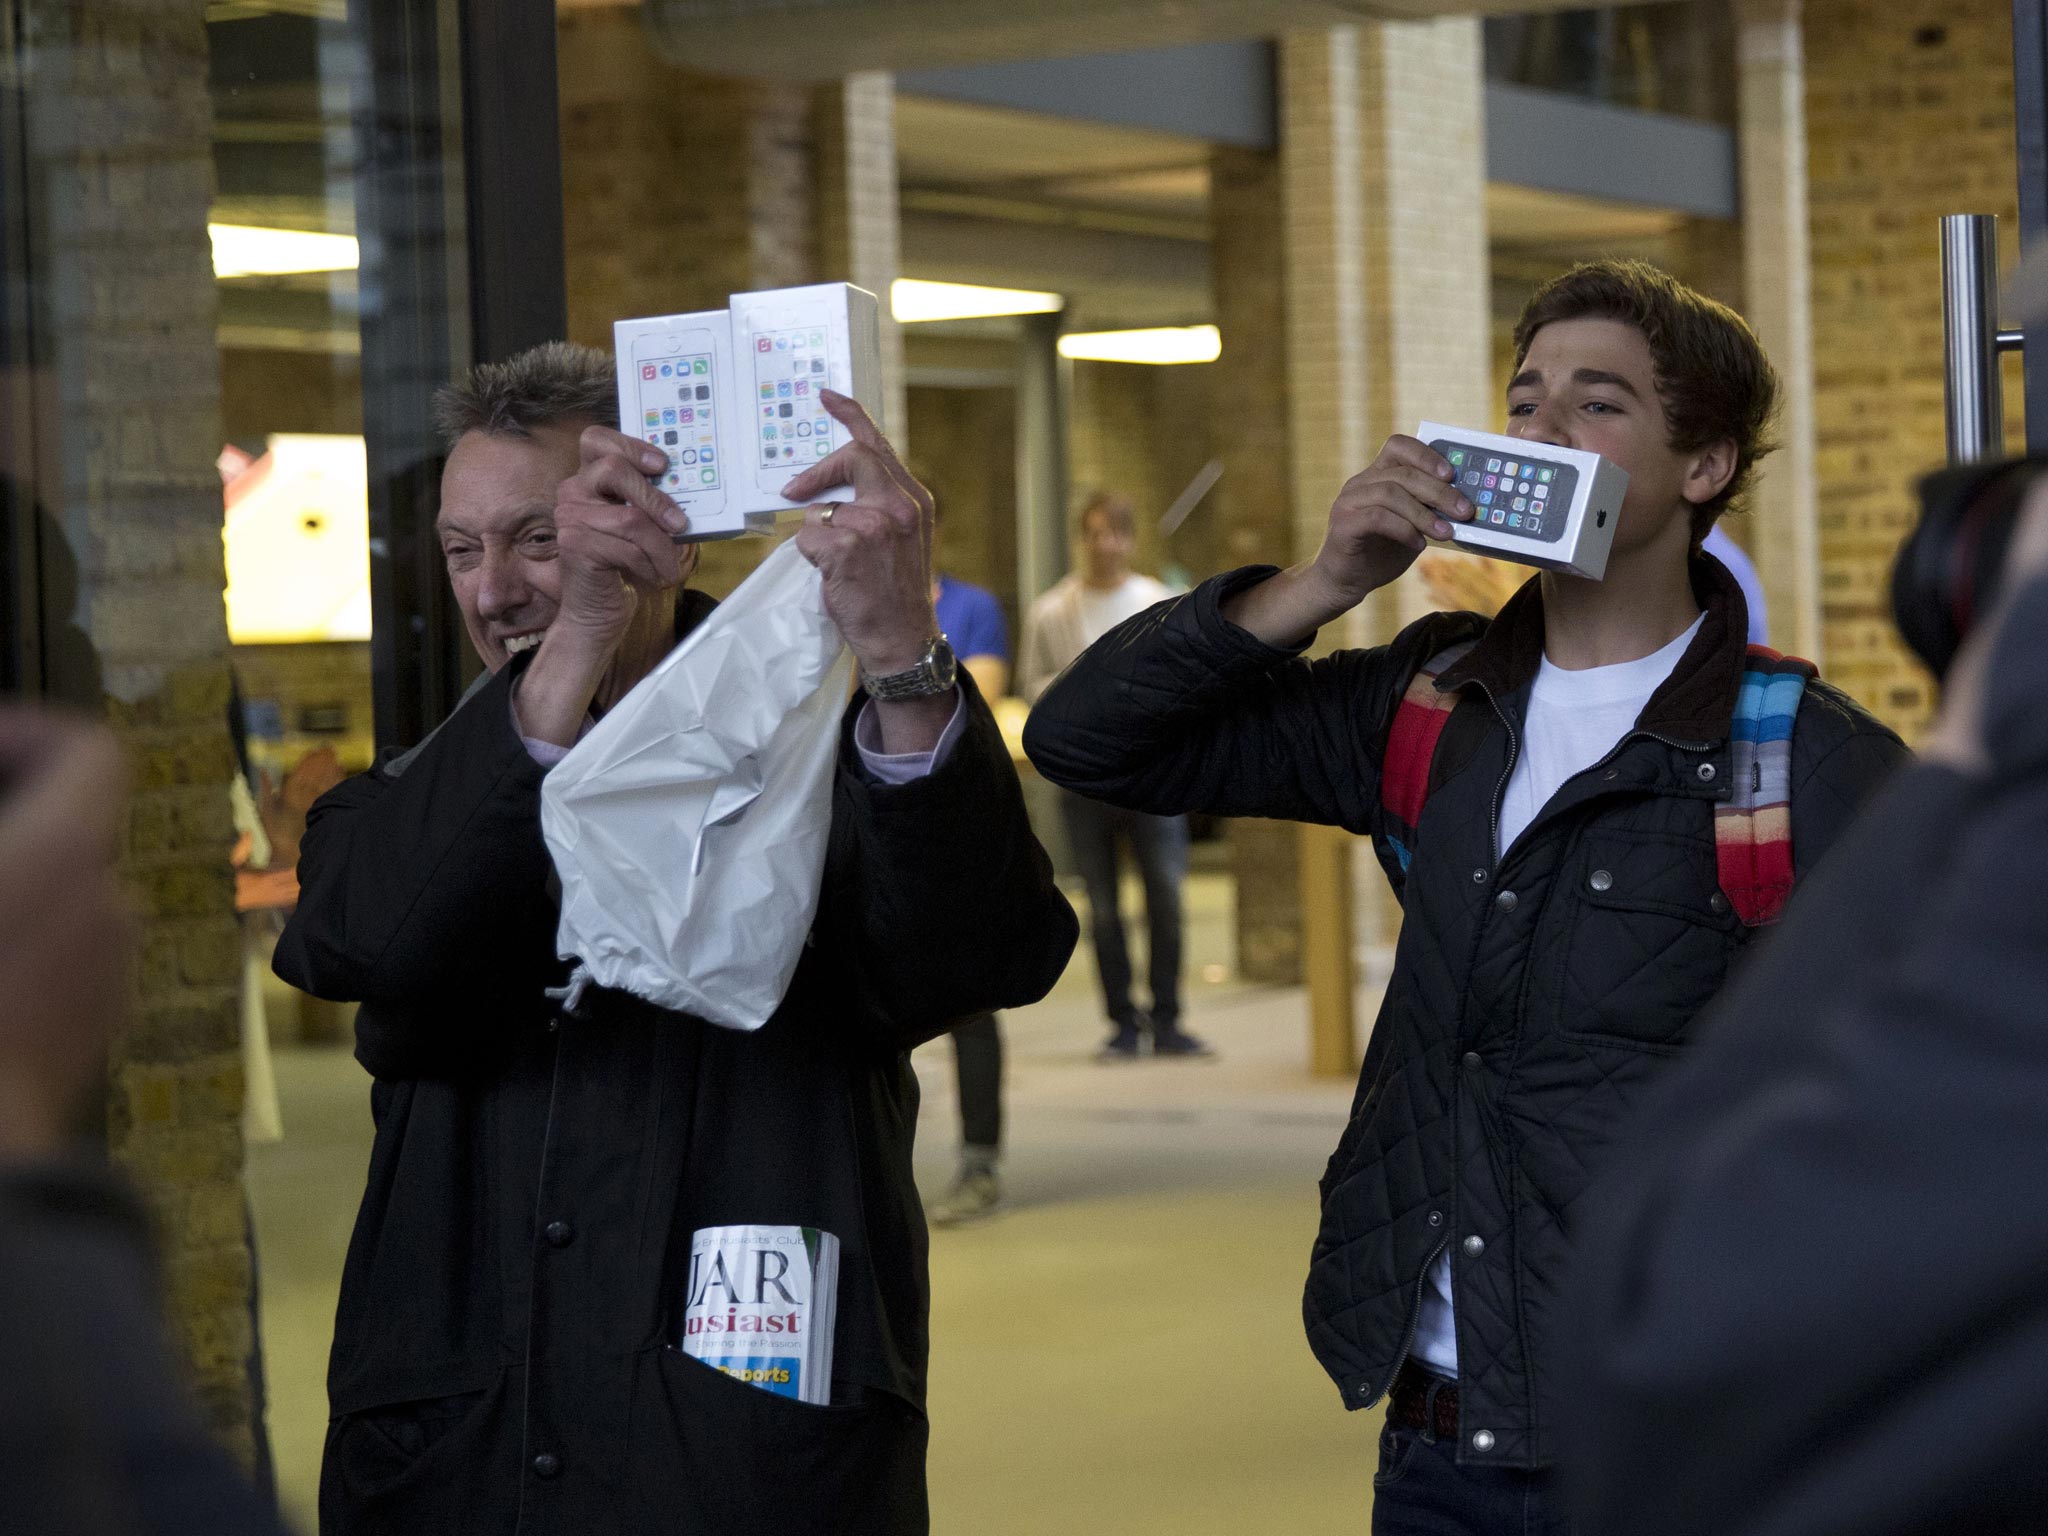 Norman Hicks, left, and Jess Green, aged 15, the first two customers at the front of the queue, pose for photographers with boxed iPhone 5s handsets as they leave the Apple Store in Covent Garden, London